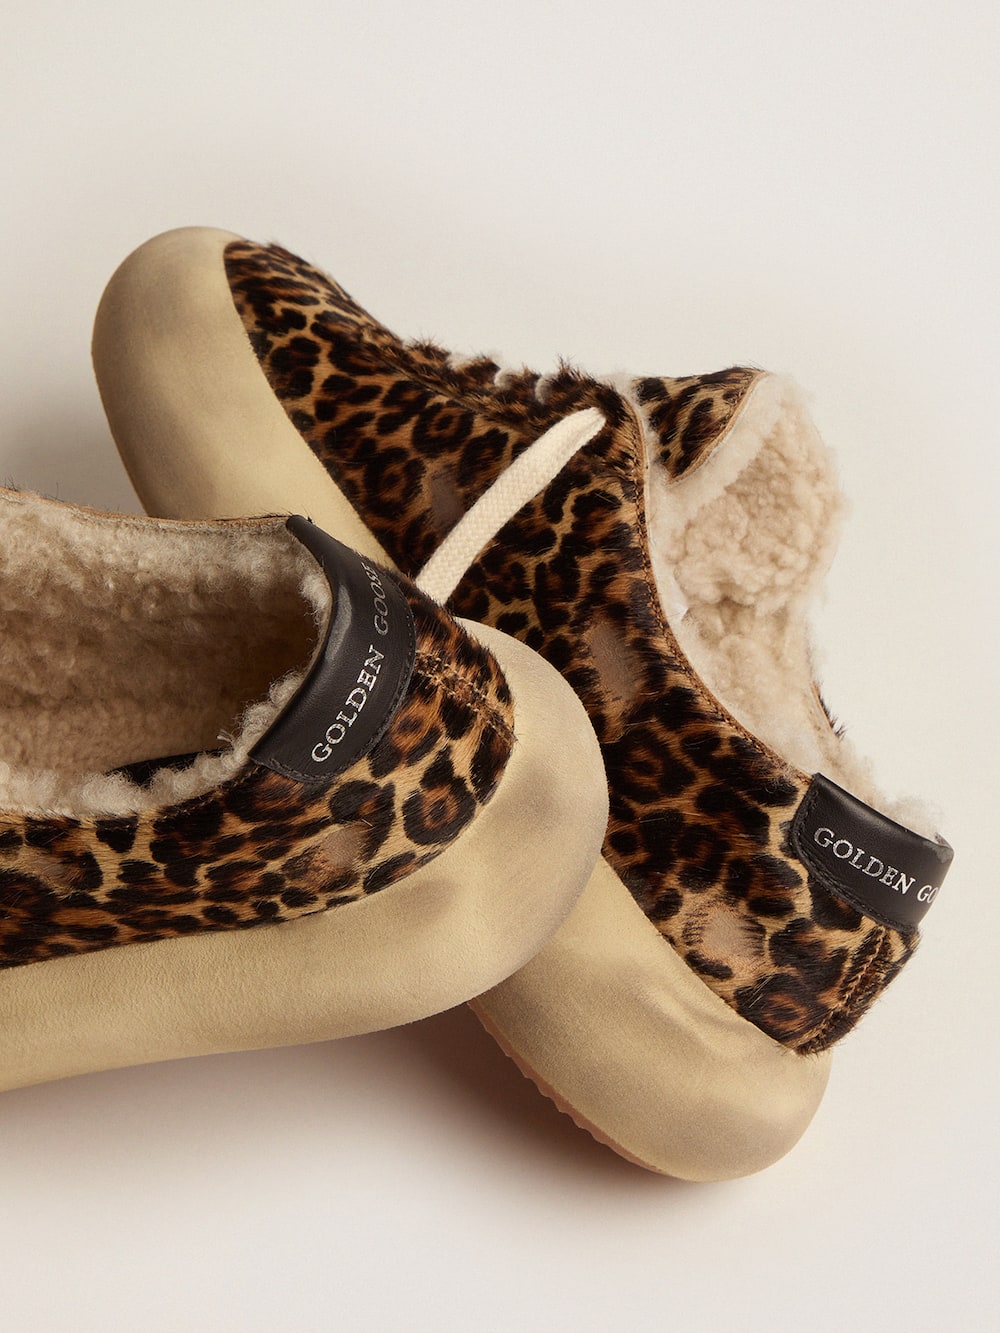 Golden Goose - Space-Star shoes in animal-print pony skin with shearling lining in 